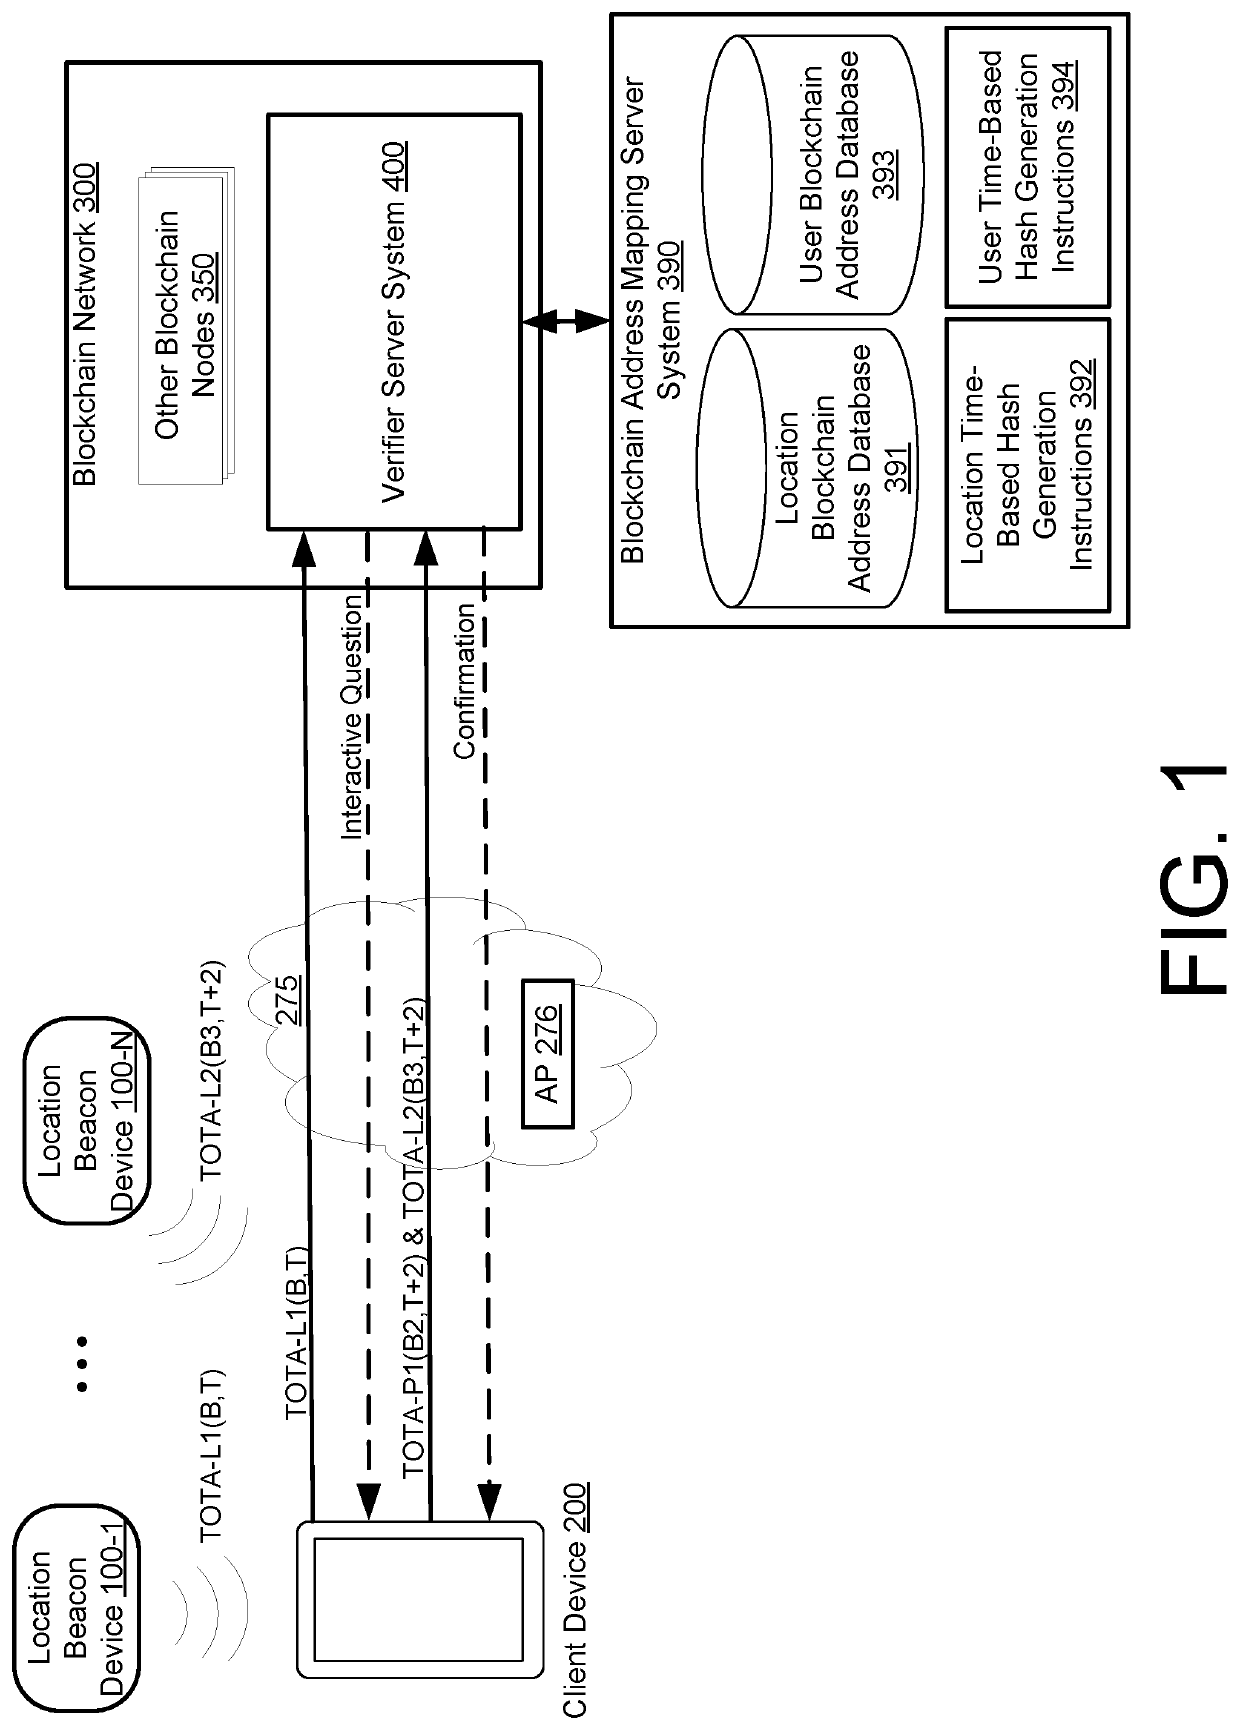 Systems and methods for using smart contract and light and sound emitting assets provisioned with distributed ledger addresses to identify and locate assets